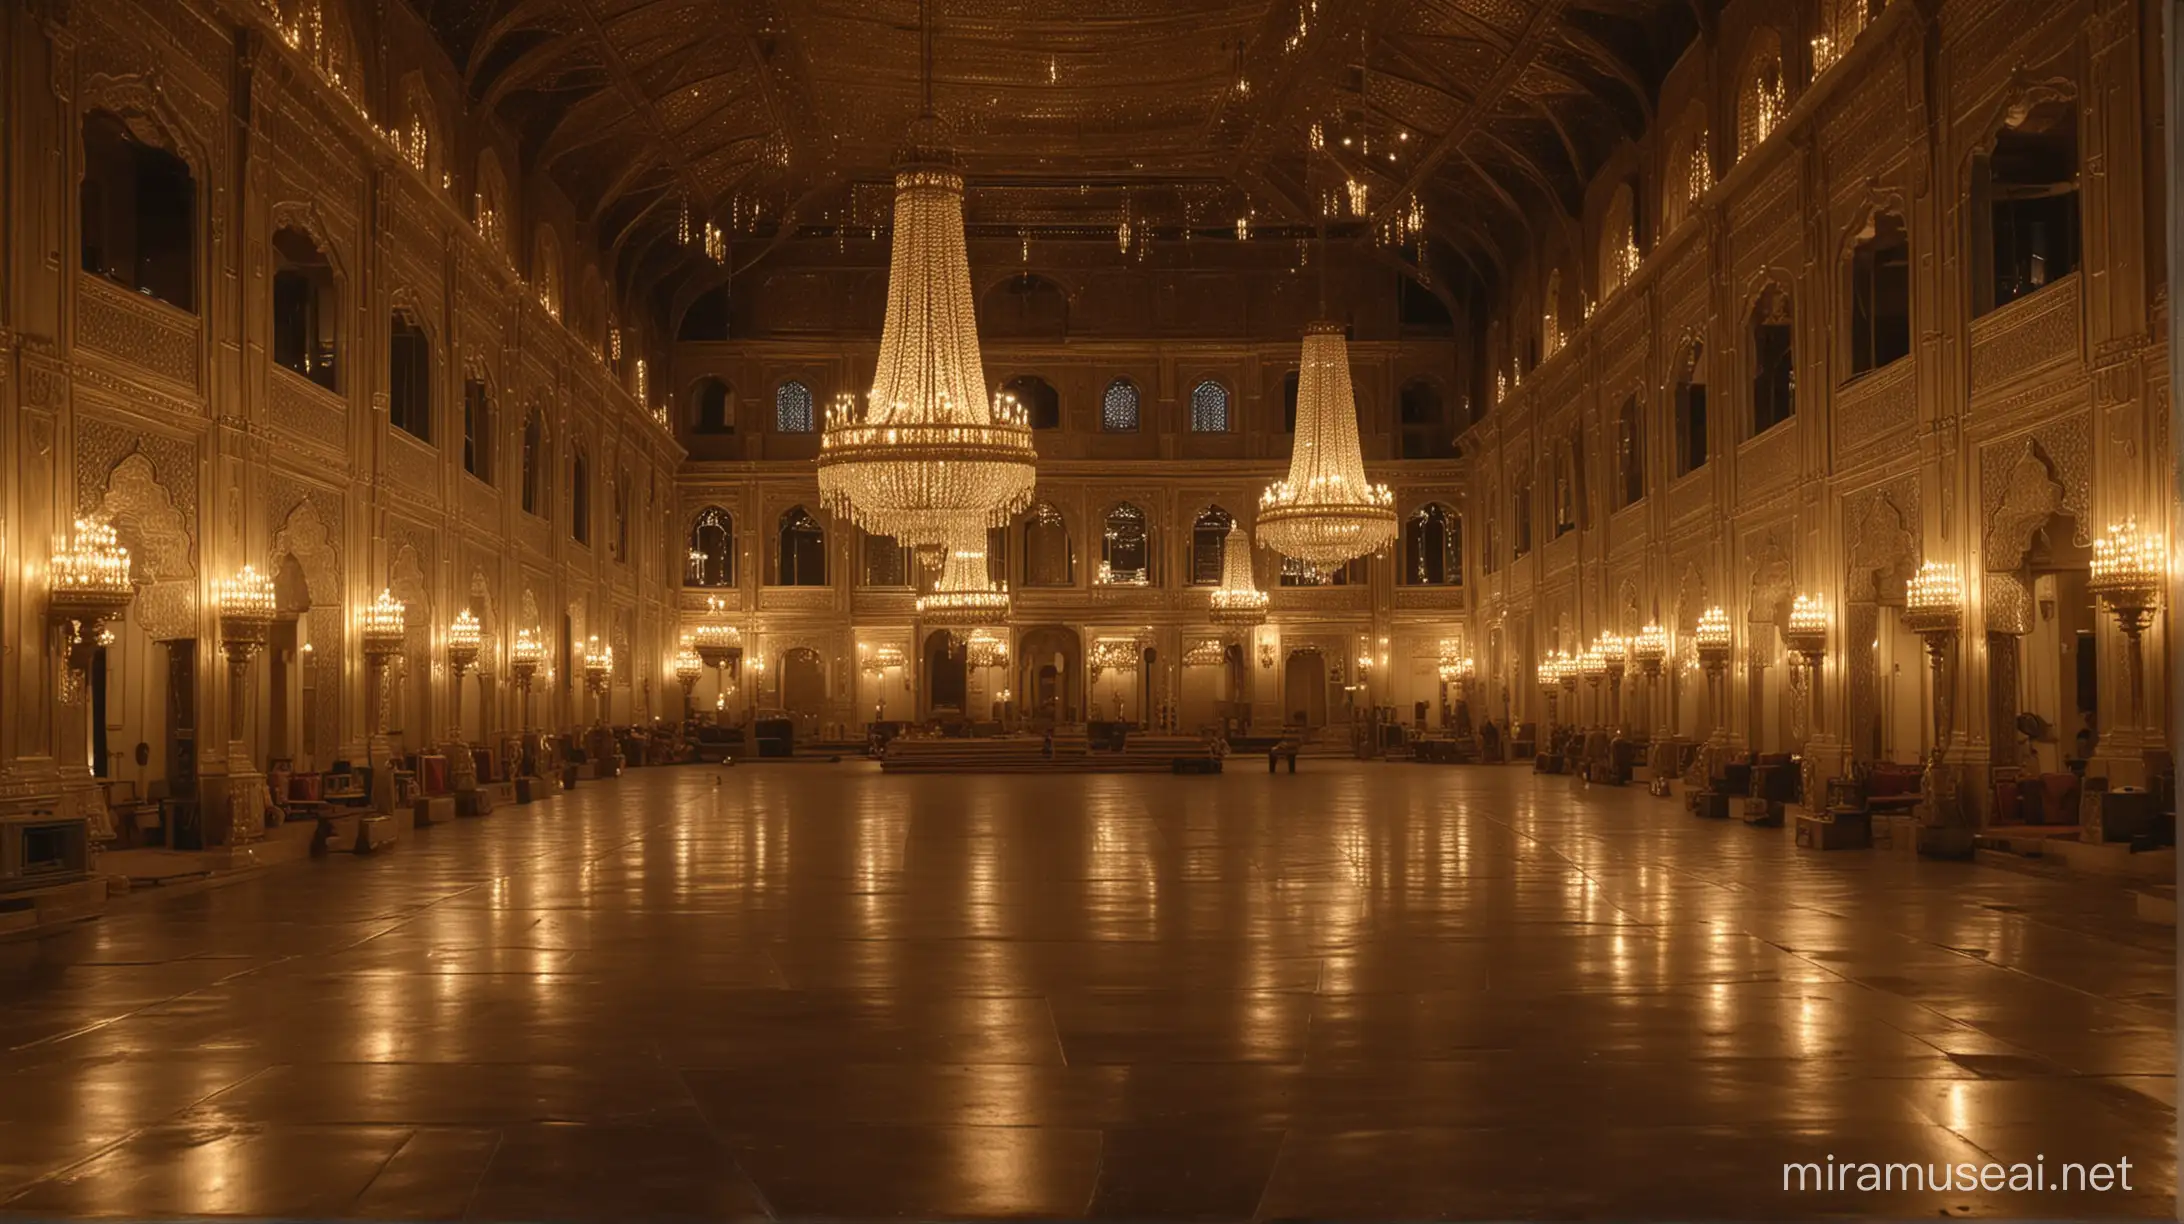 wide angle, night, huge room of Indian palace with lots of windows, only candles and earthern lamps, lots of gold and silver decoration